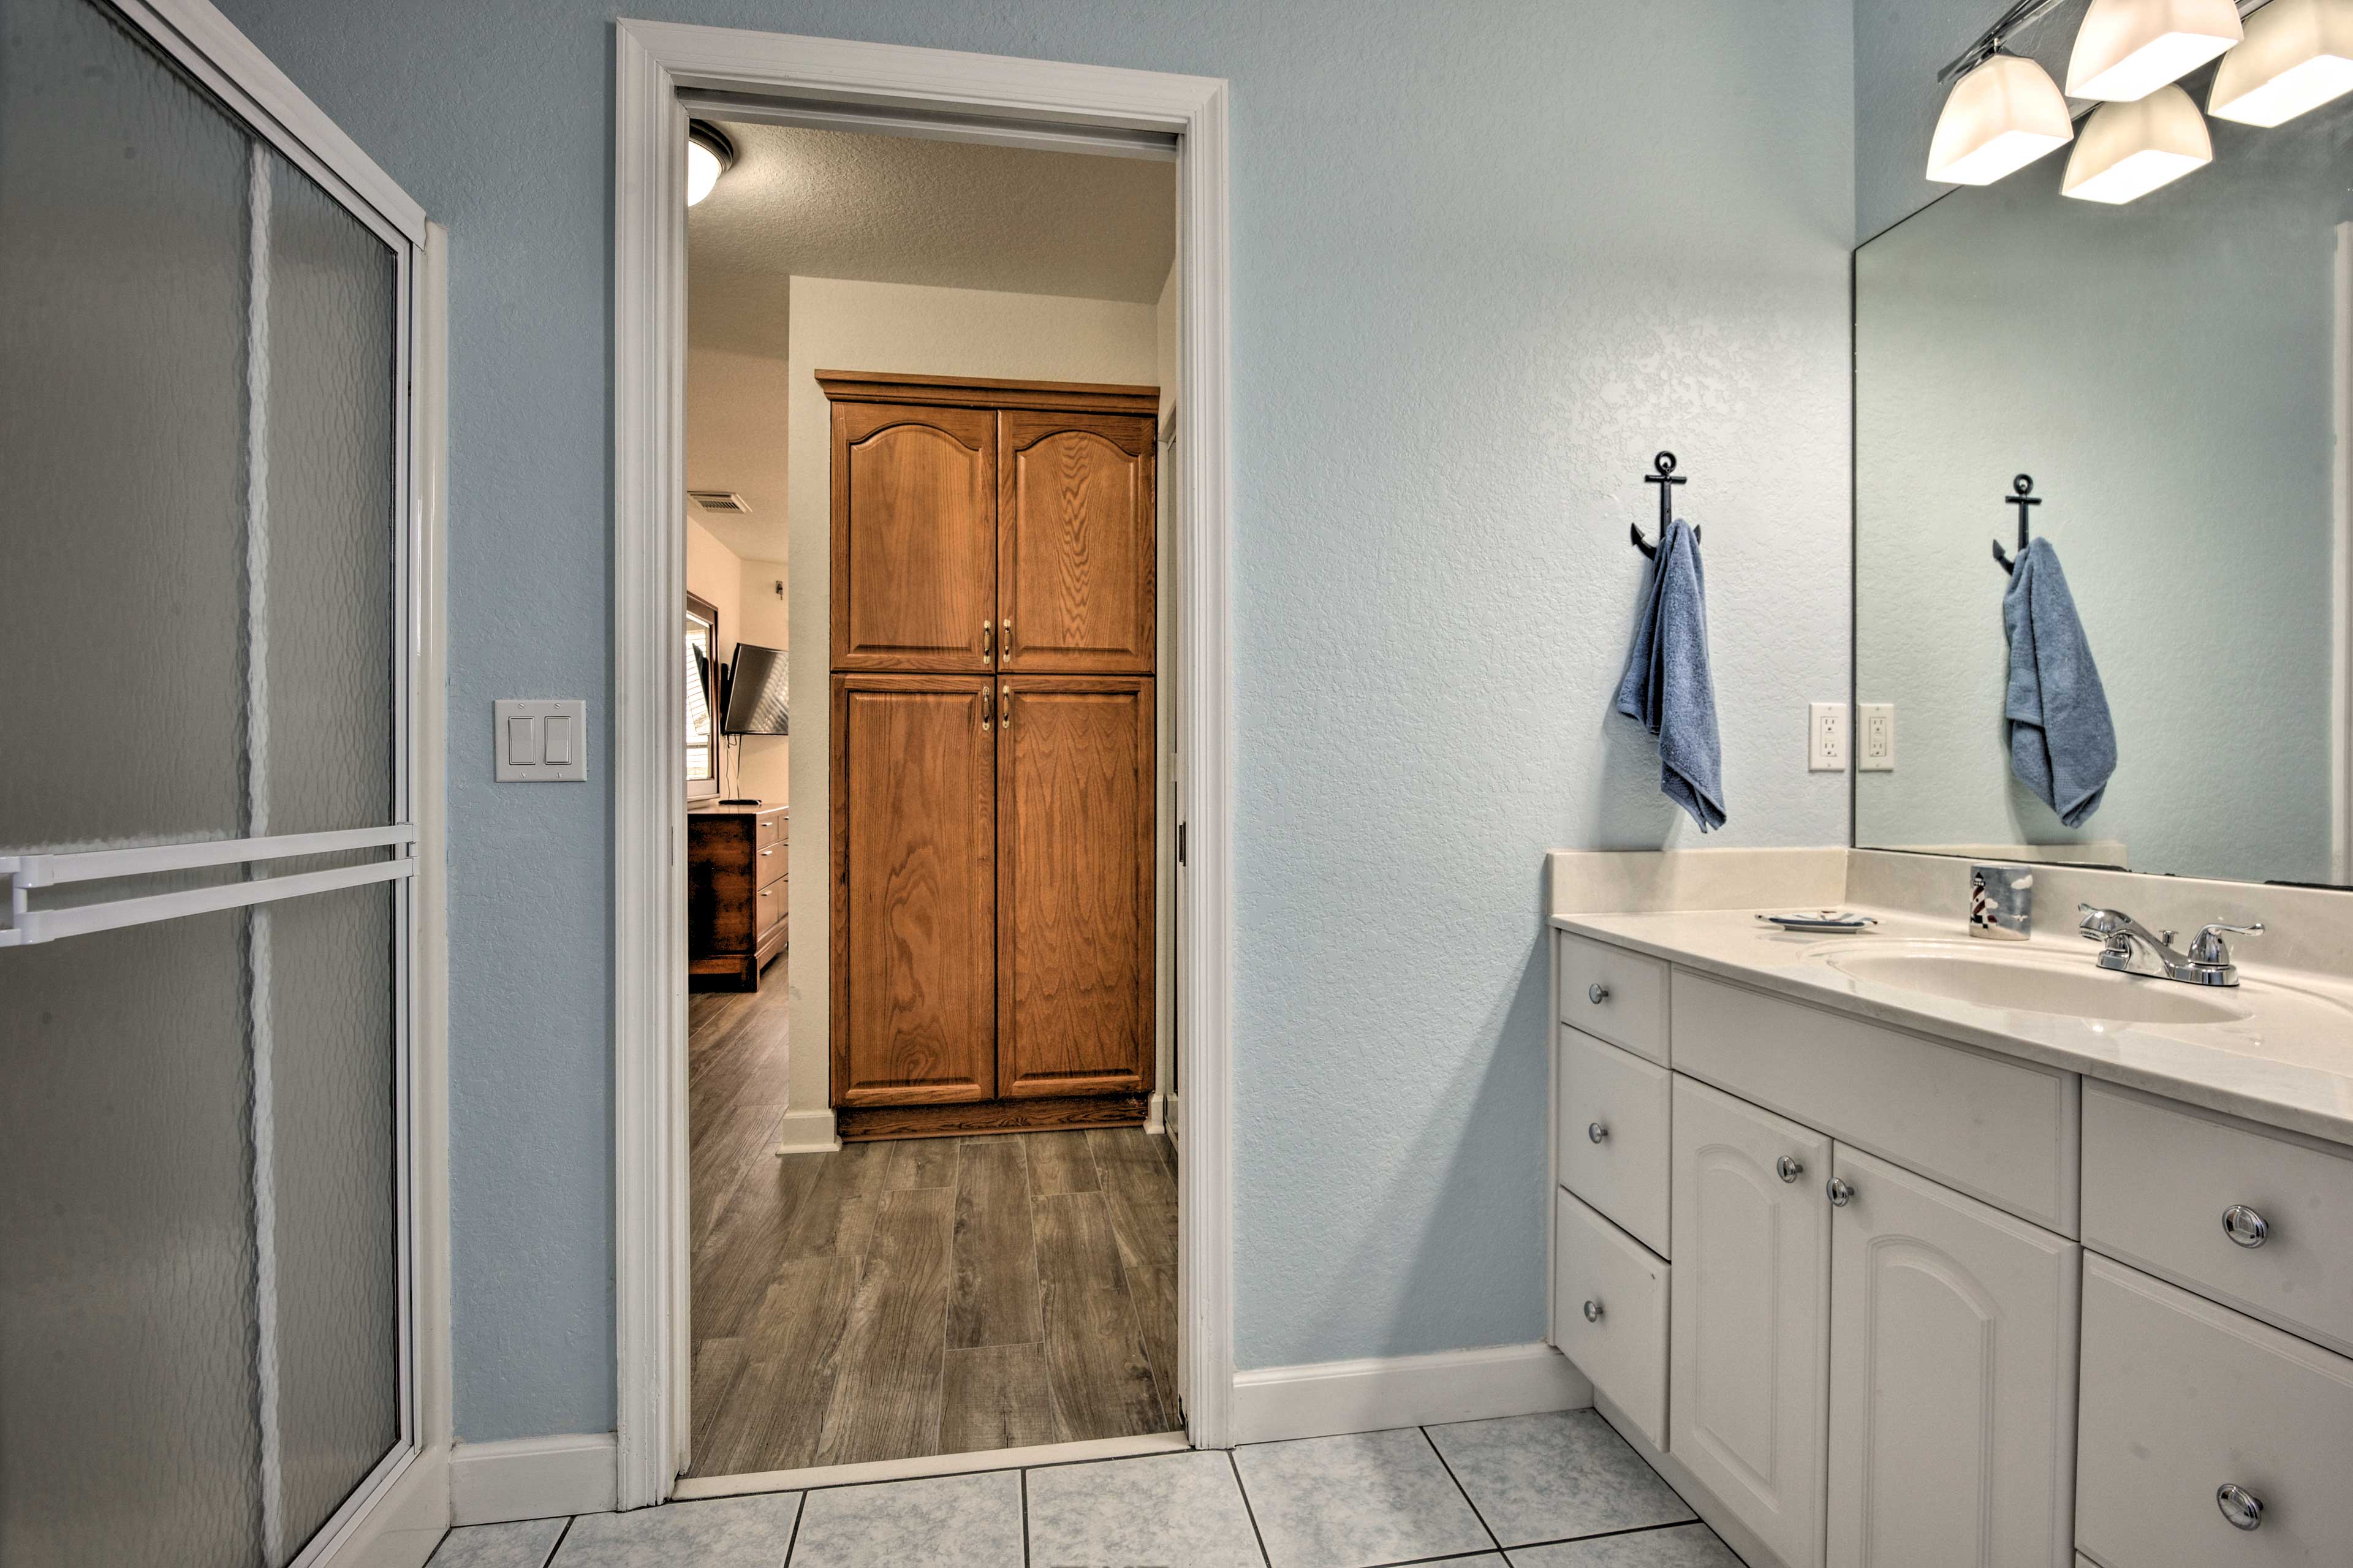 The second bathroom includes a walk-in shower.